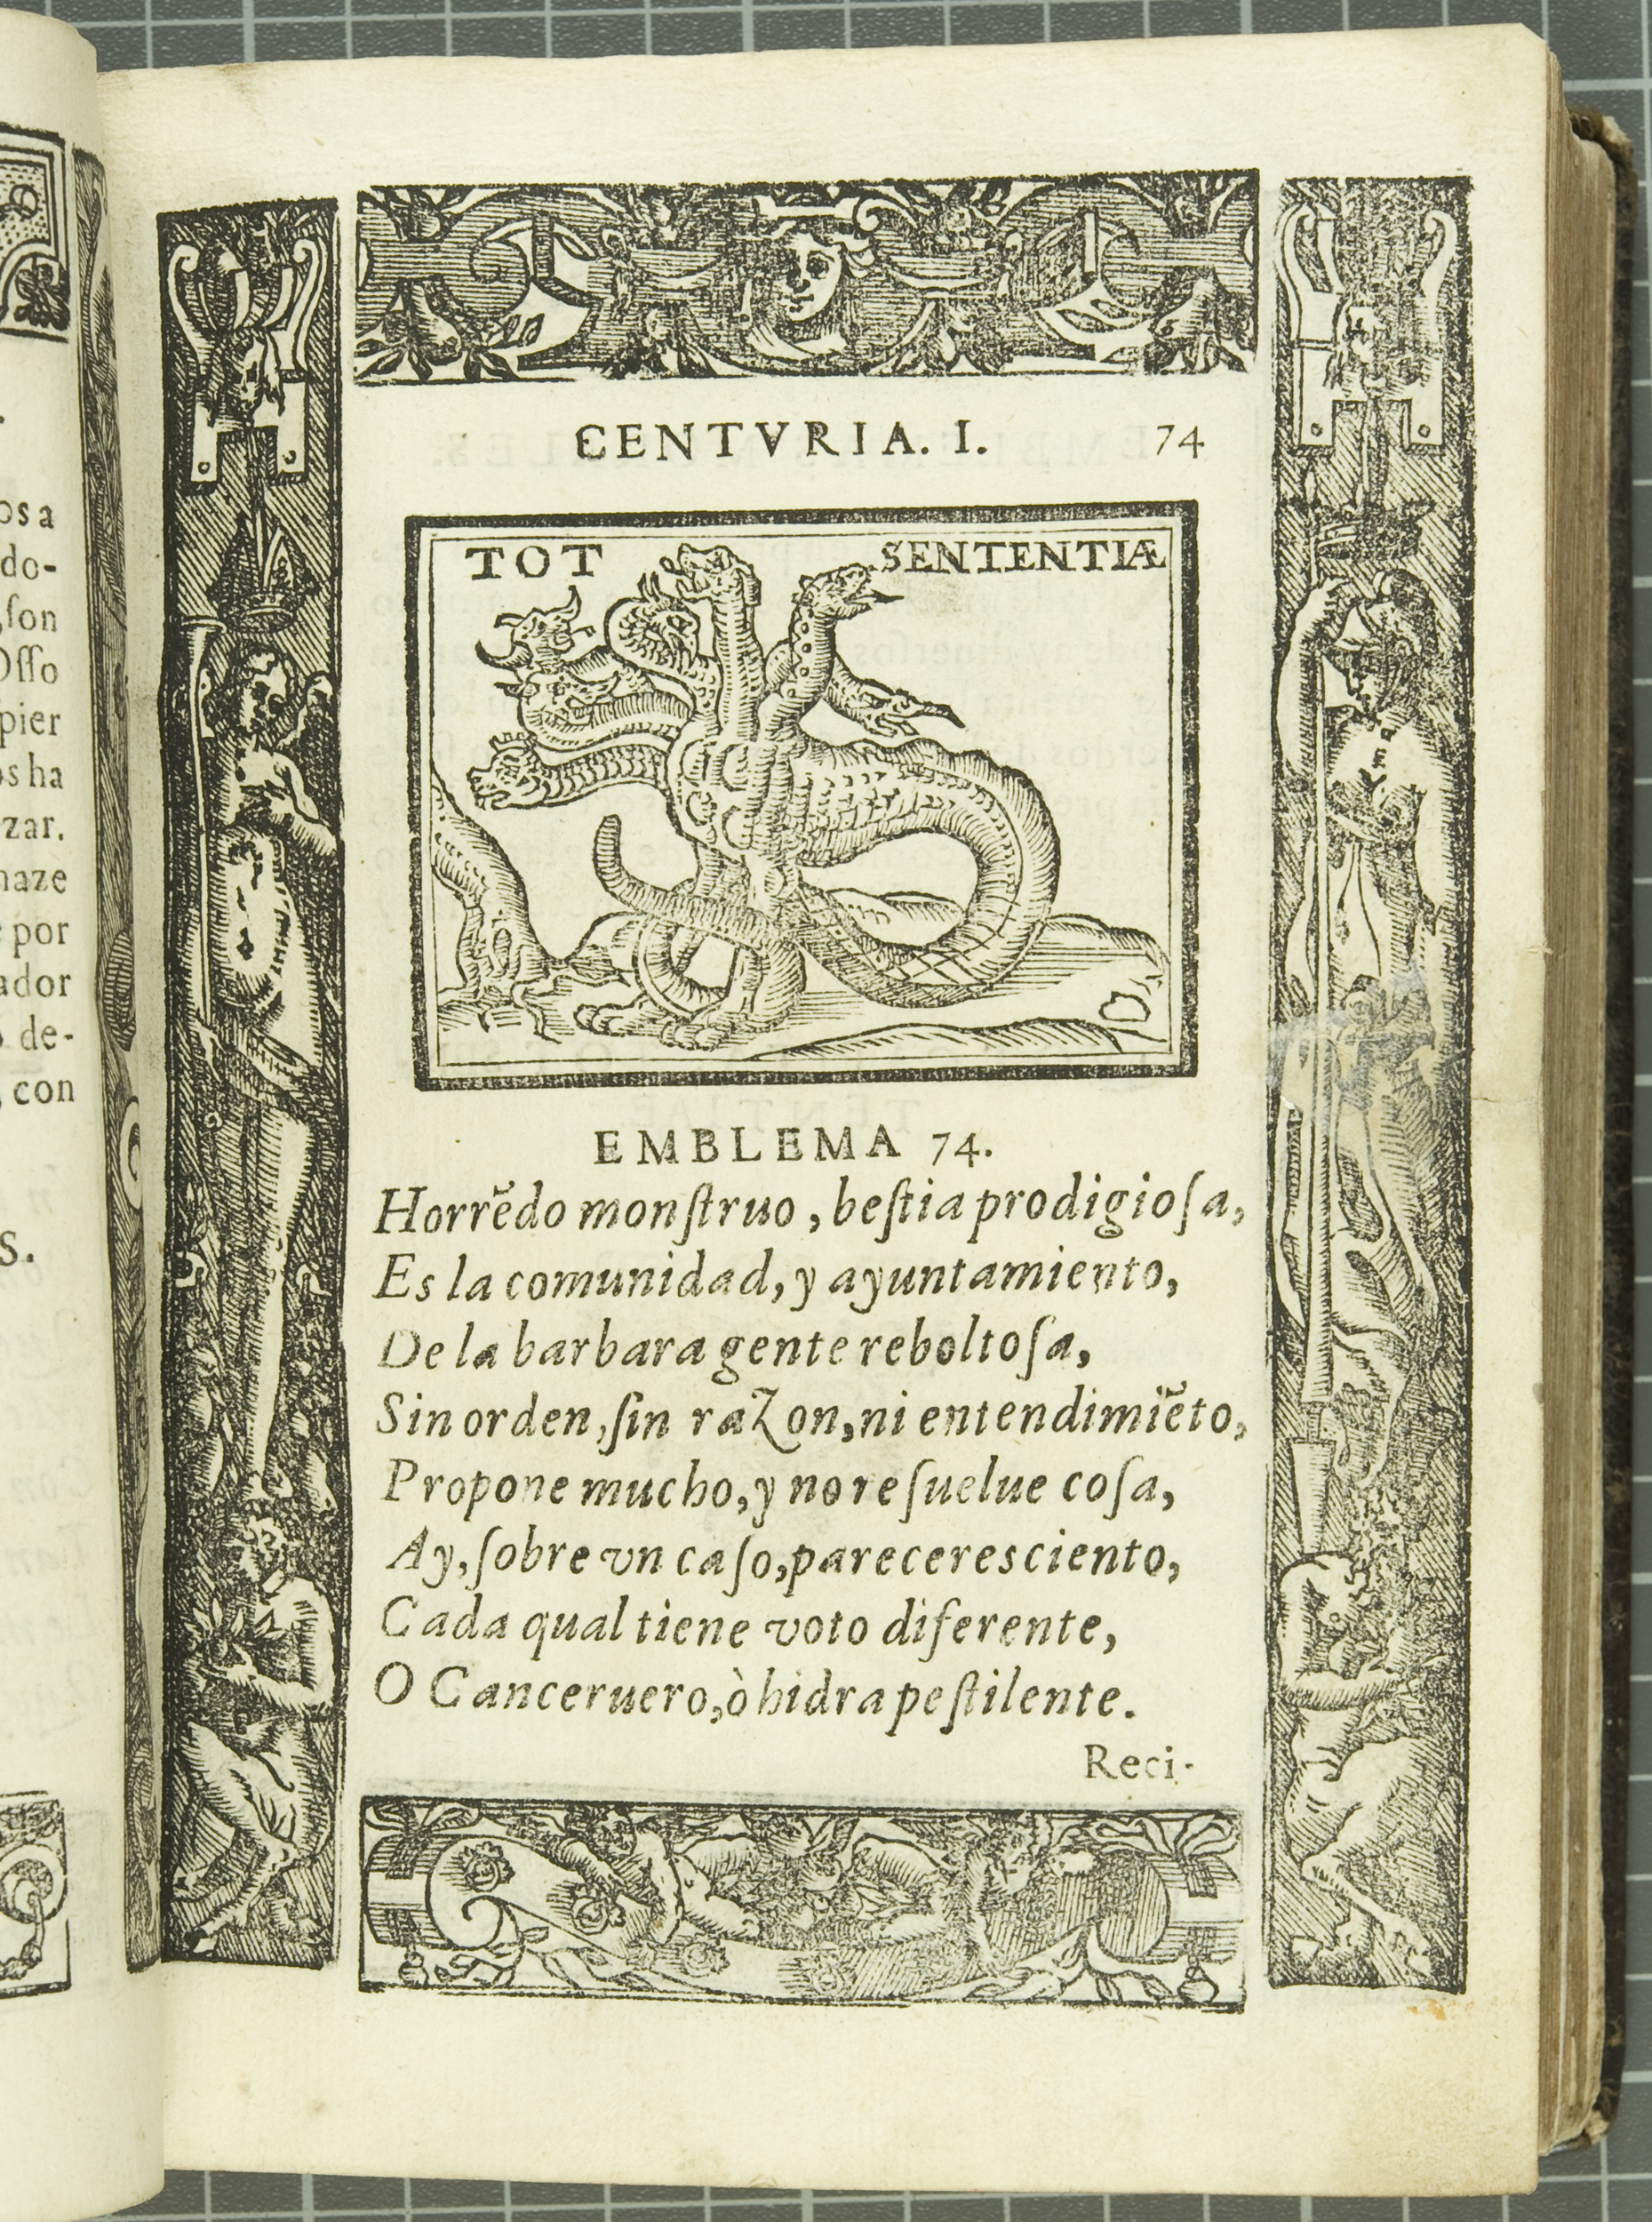 Emblem 74: "Tot sententiae" (Many opinions), from Covarrubias’s Emblemas morales (1610).